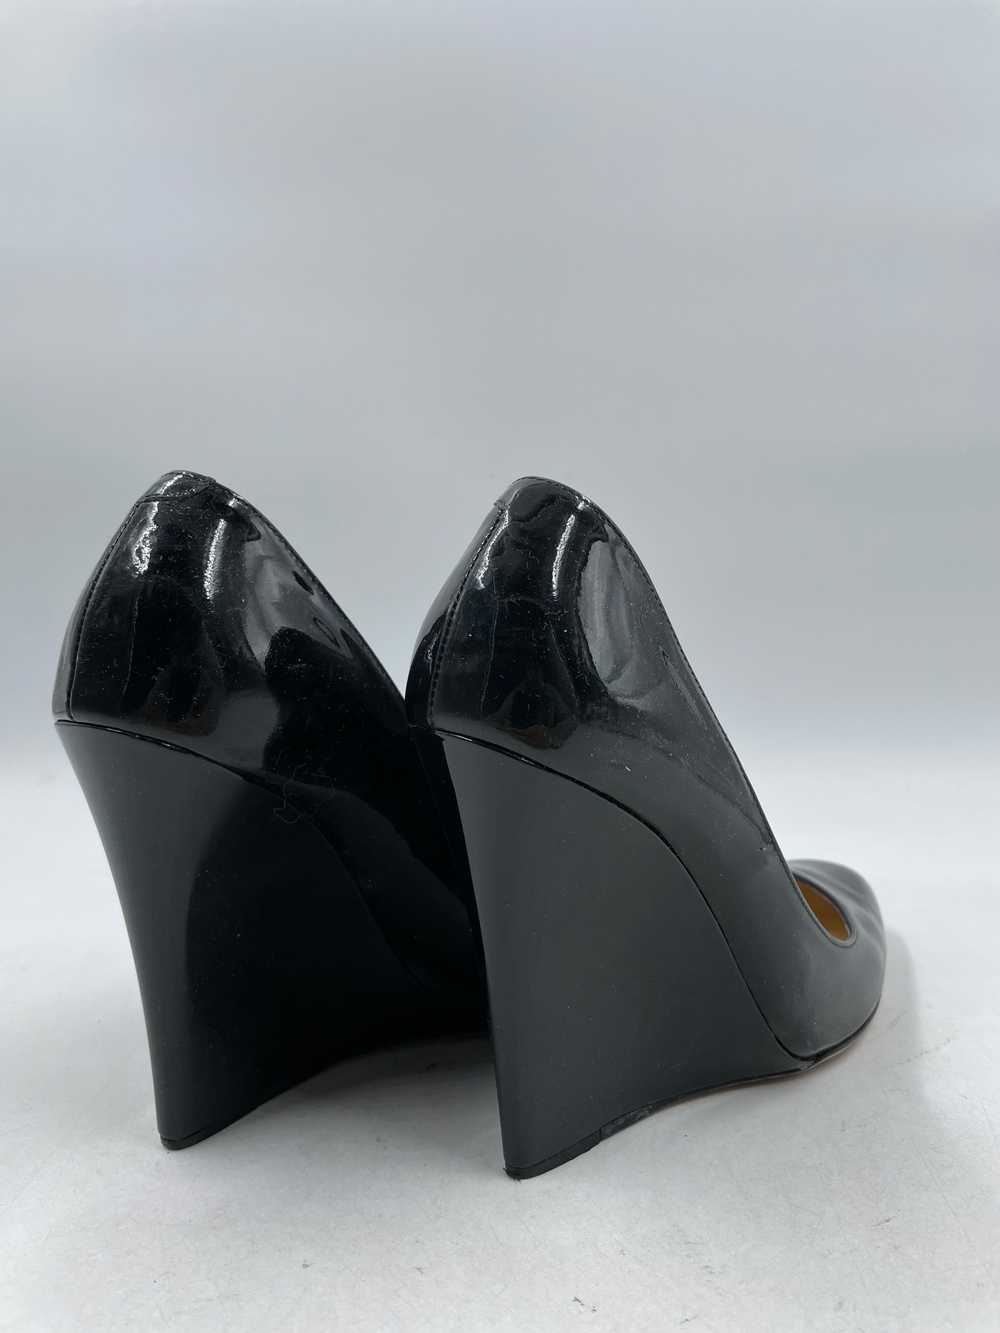 Authentic Jimmy Choo Black Patent Wedge Pumps W 7 - image 4